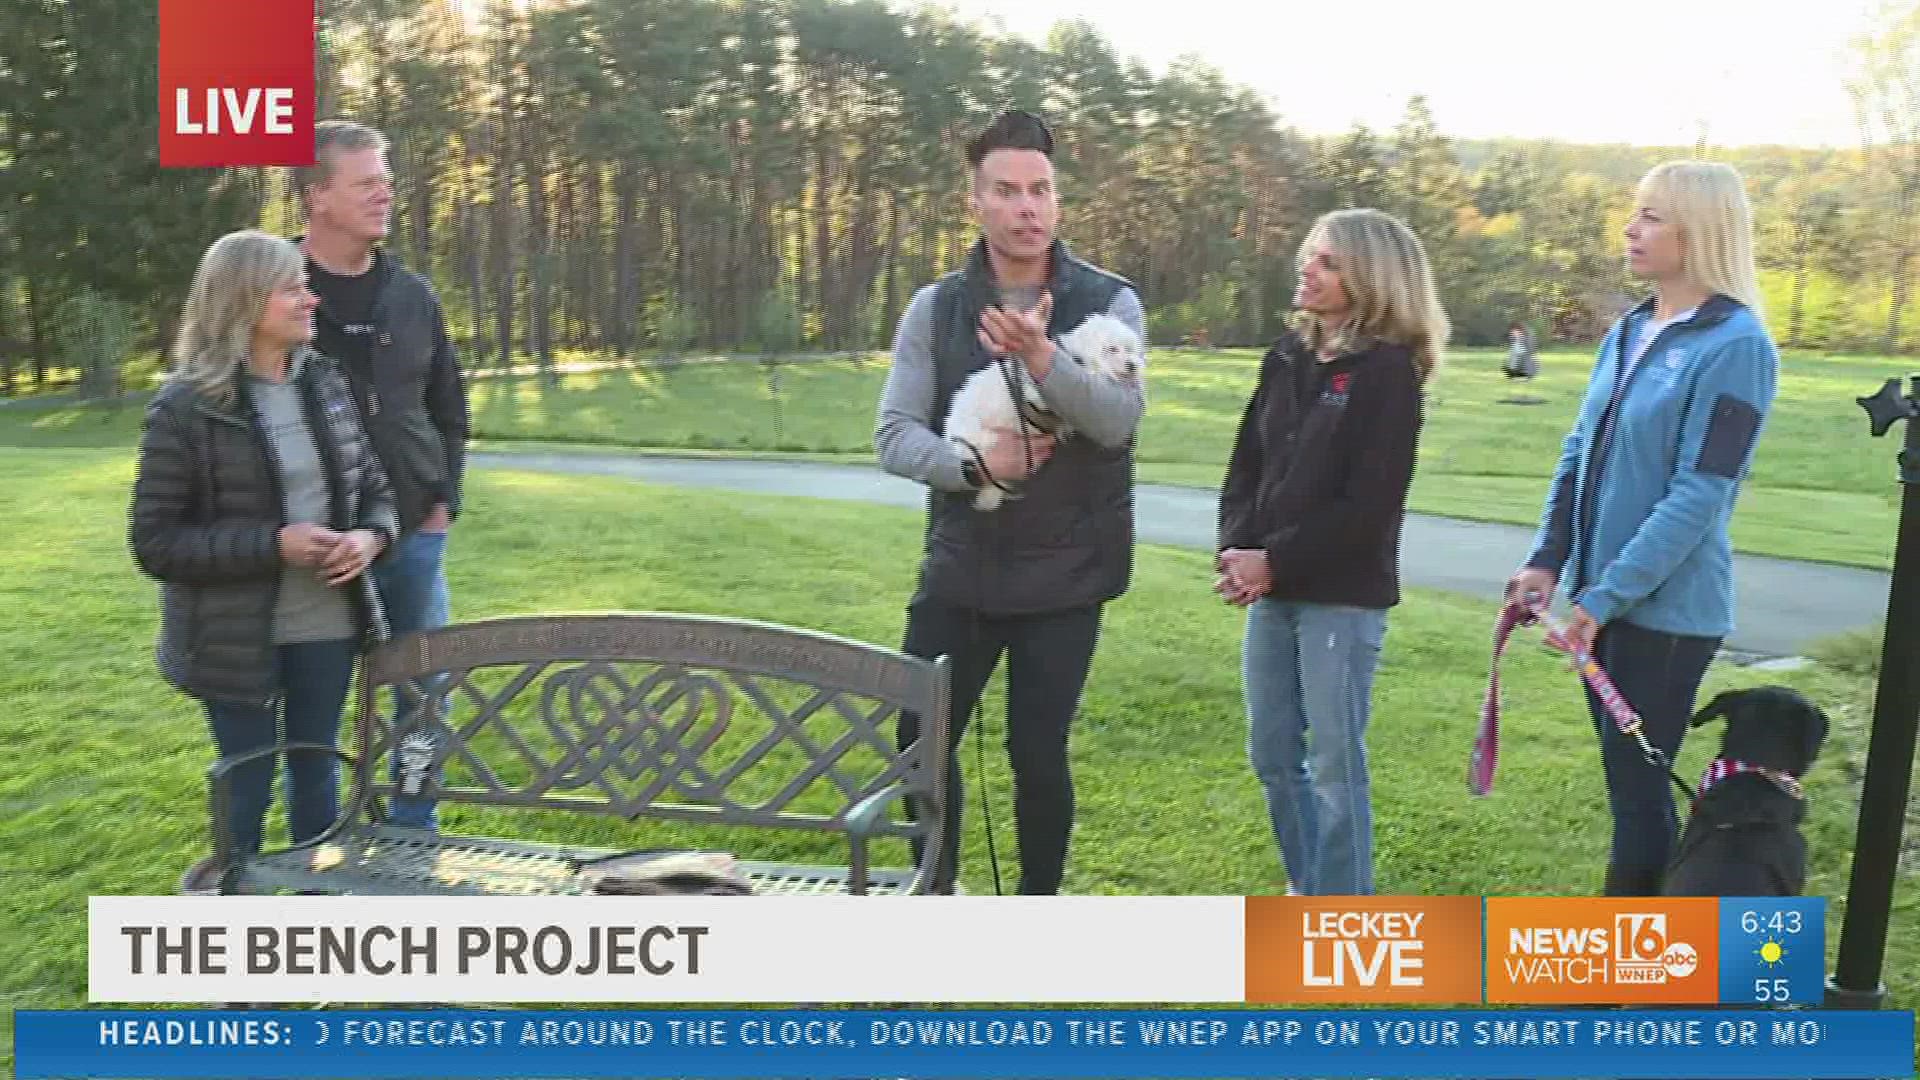 “The Bench Project” is introducing more people to the feel-good project this weekend and helping some area furbabies at the same time.